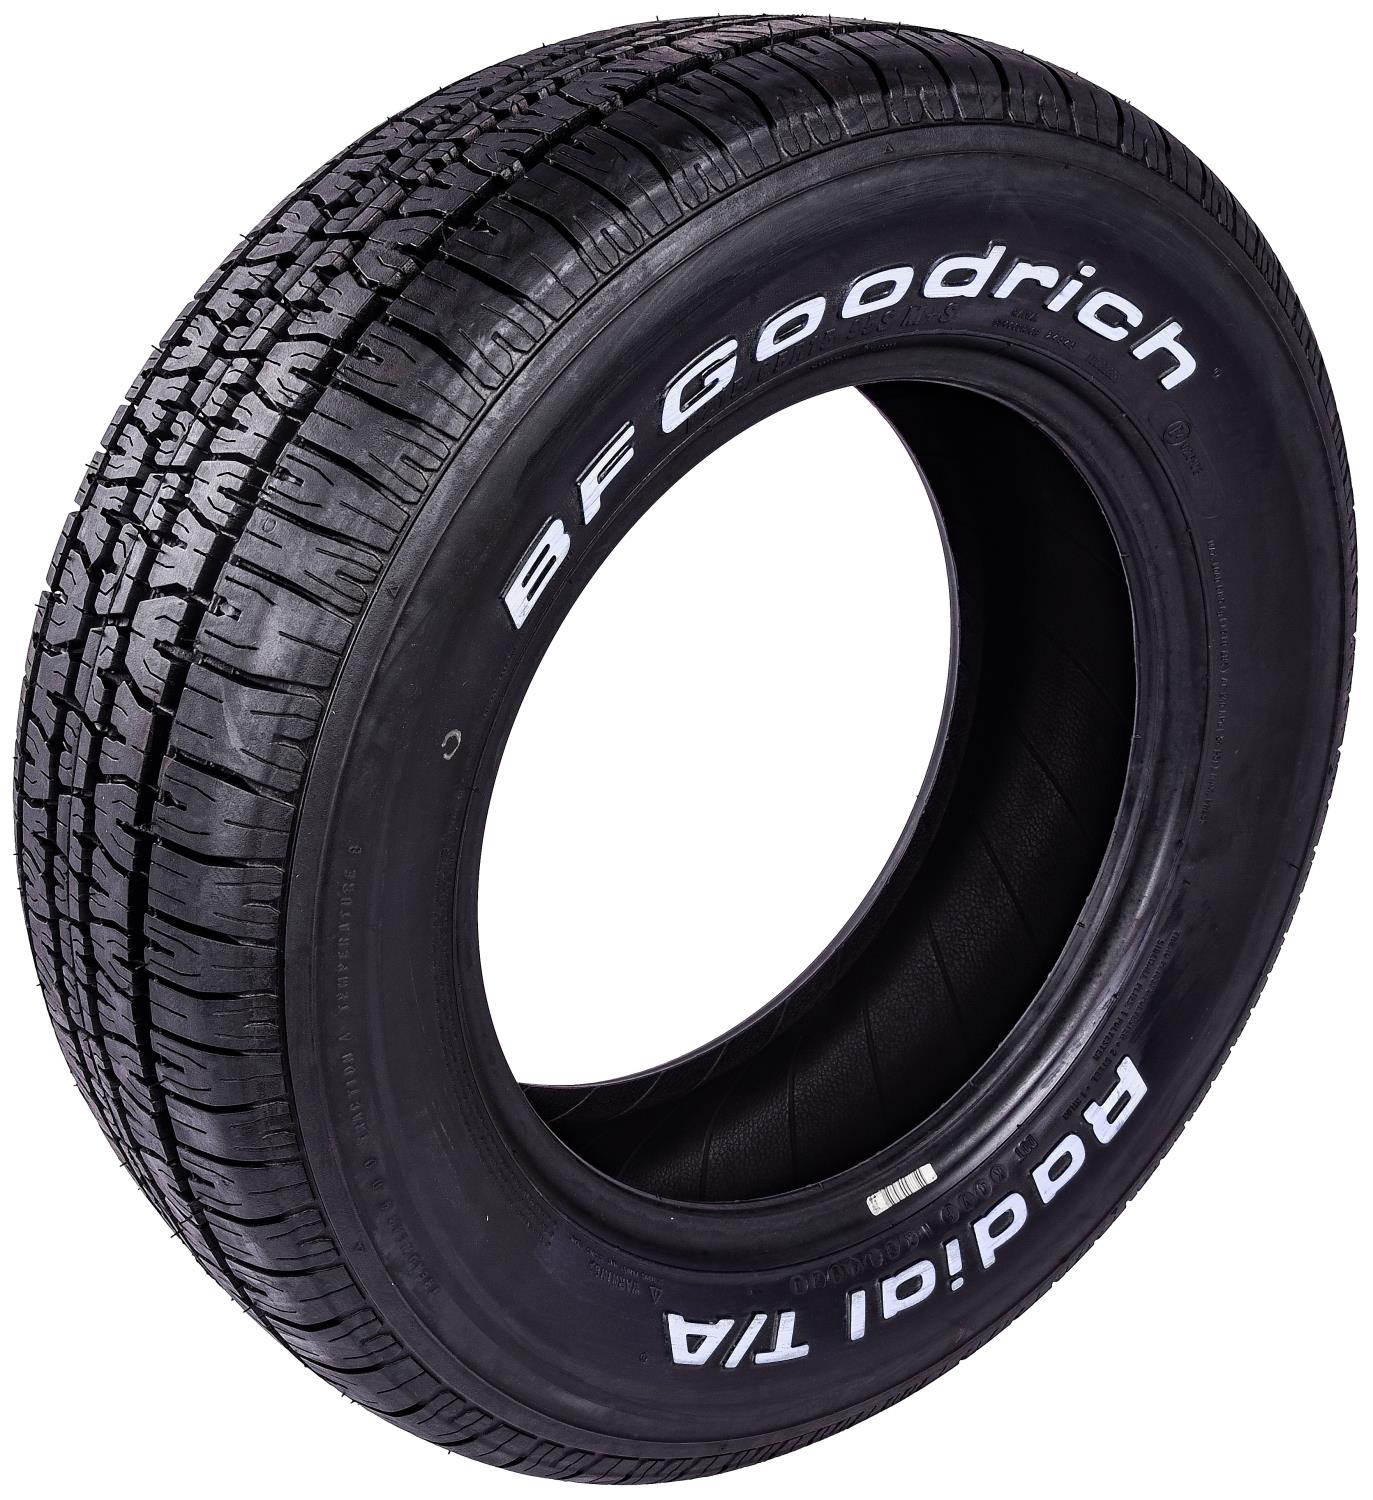 BF Goodrich 15015: Radial T/A Tire P215/65R15 - JEGS